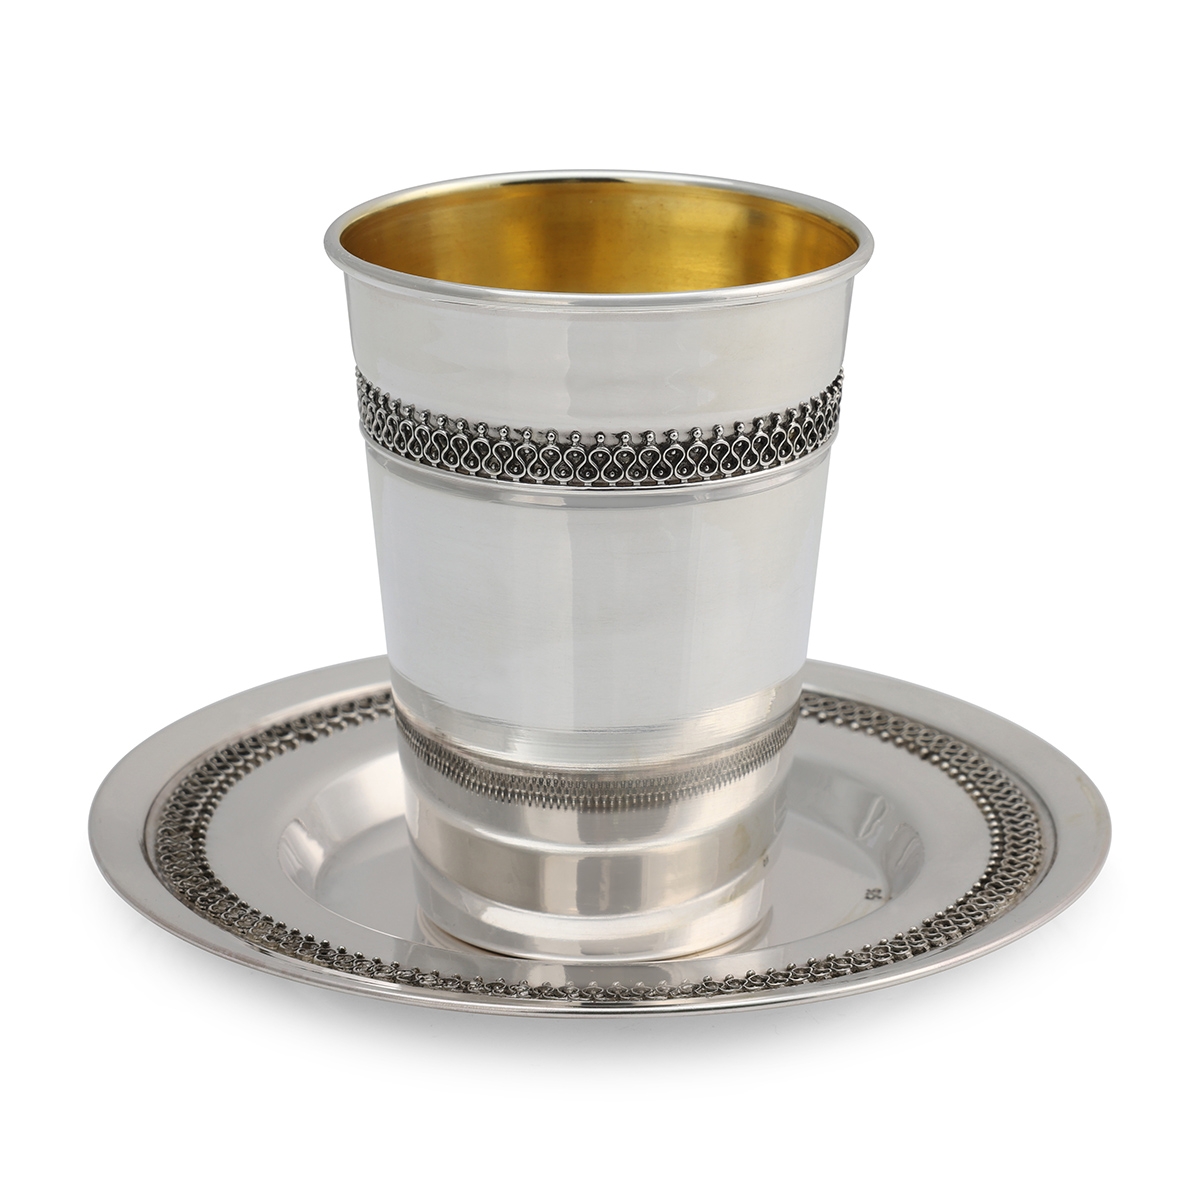 Handcrafted Polished Sterling Silver Kiddush Cup With Filigree Design By Traditional Yemenite Art - 1